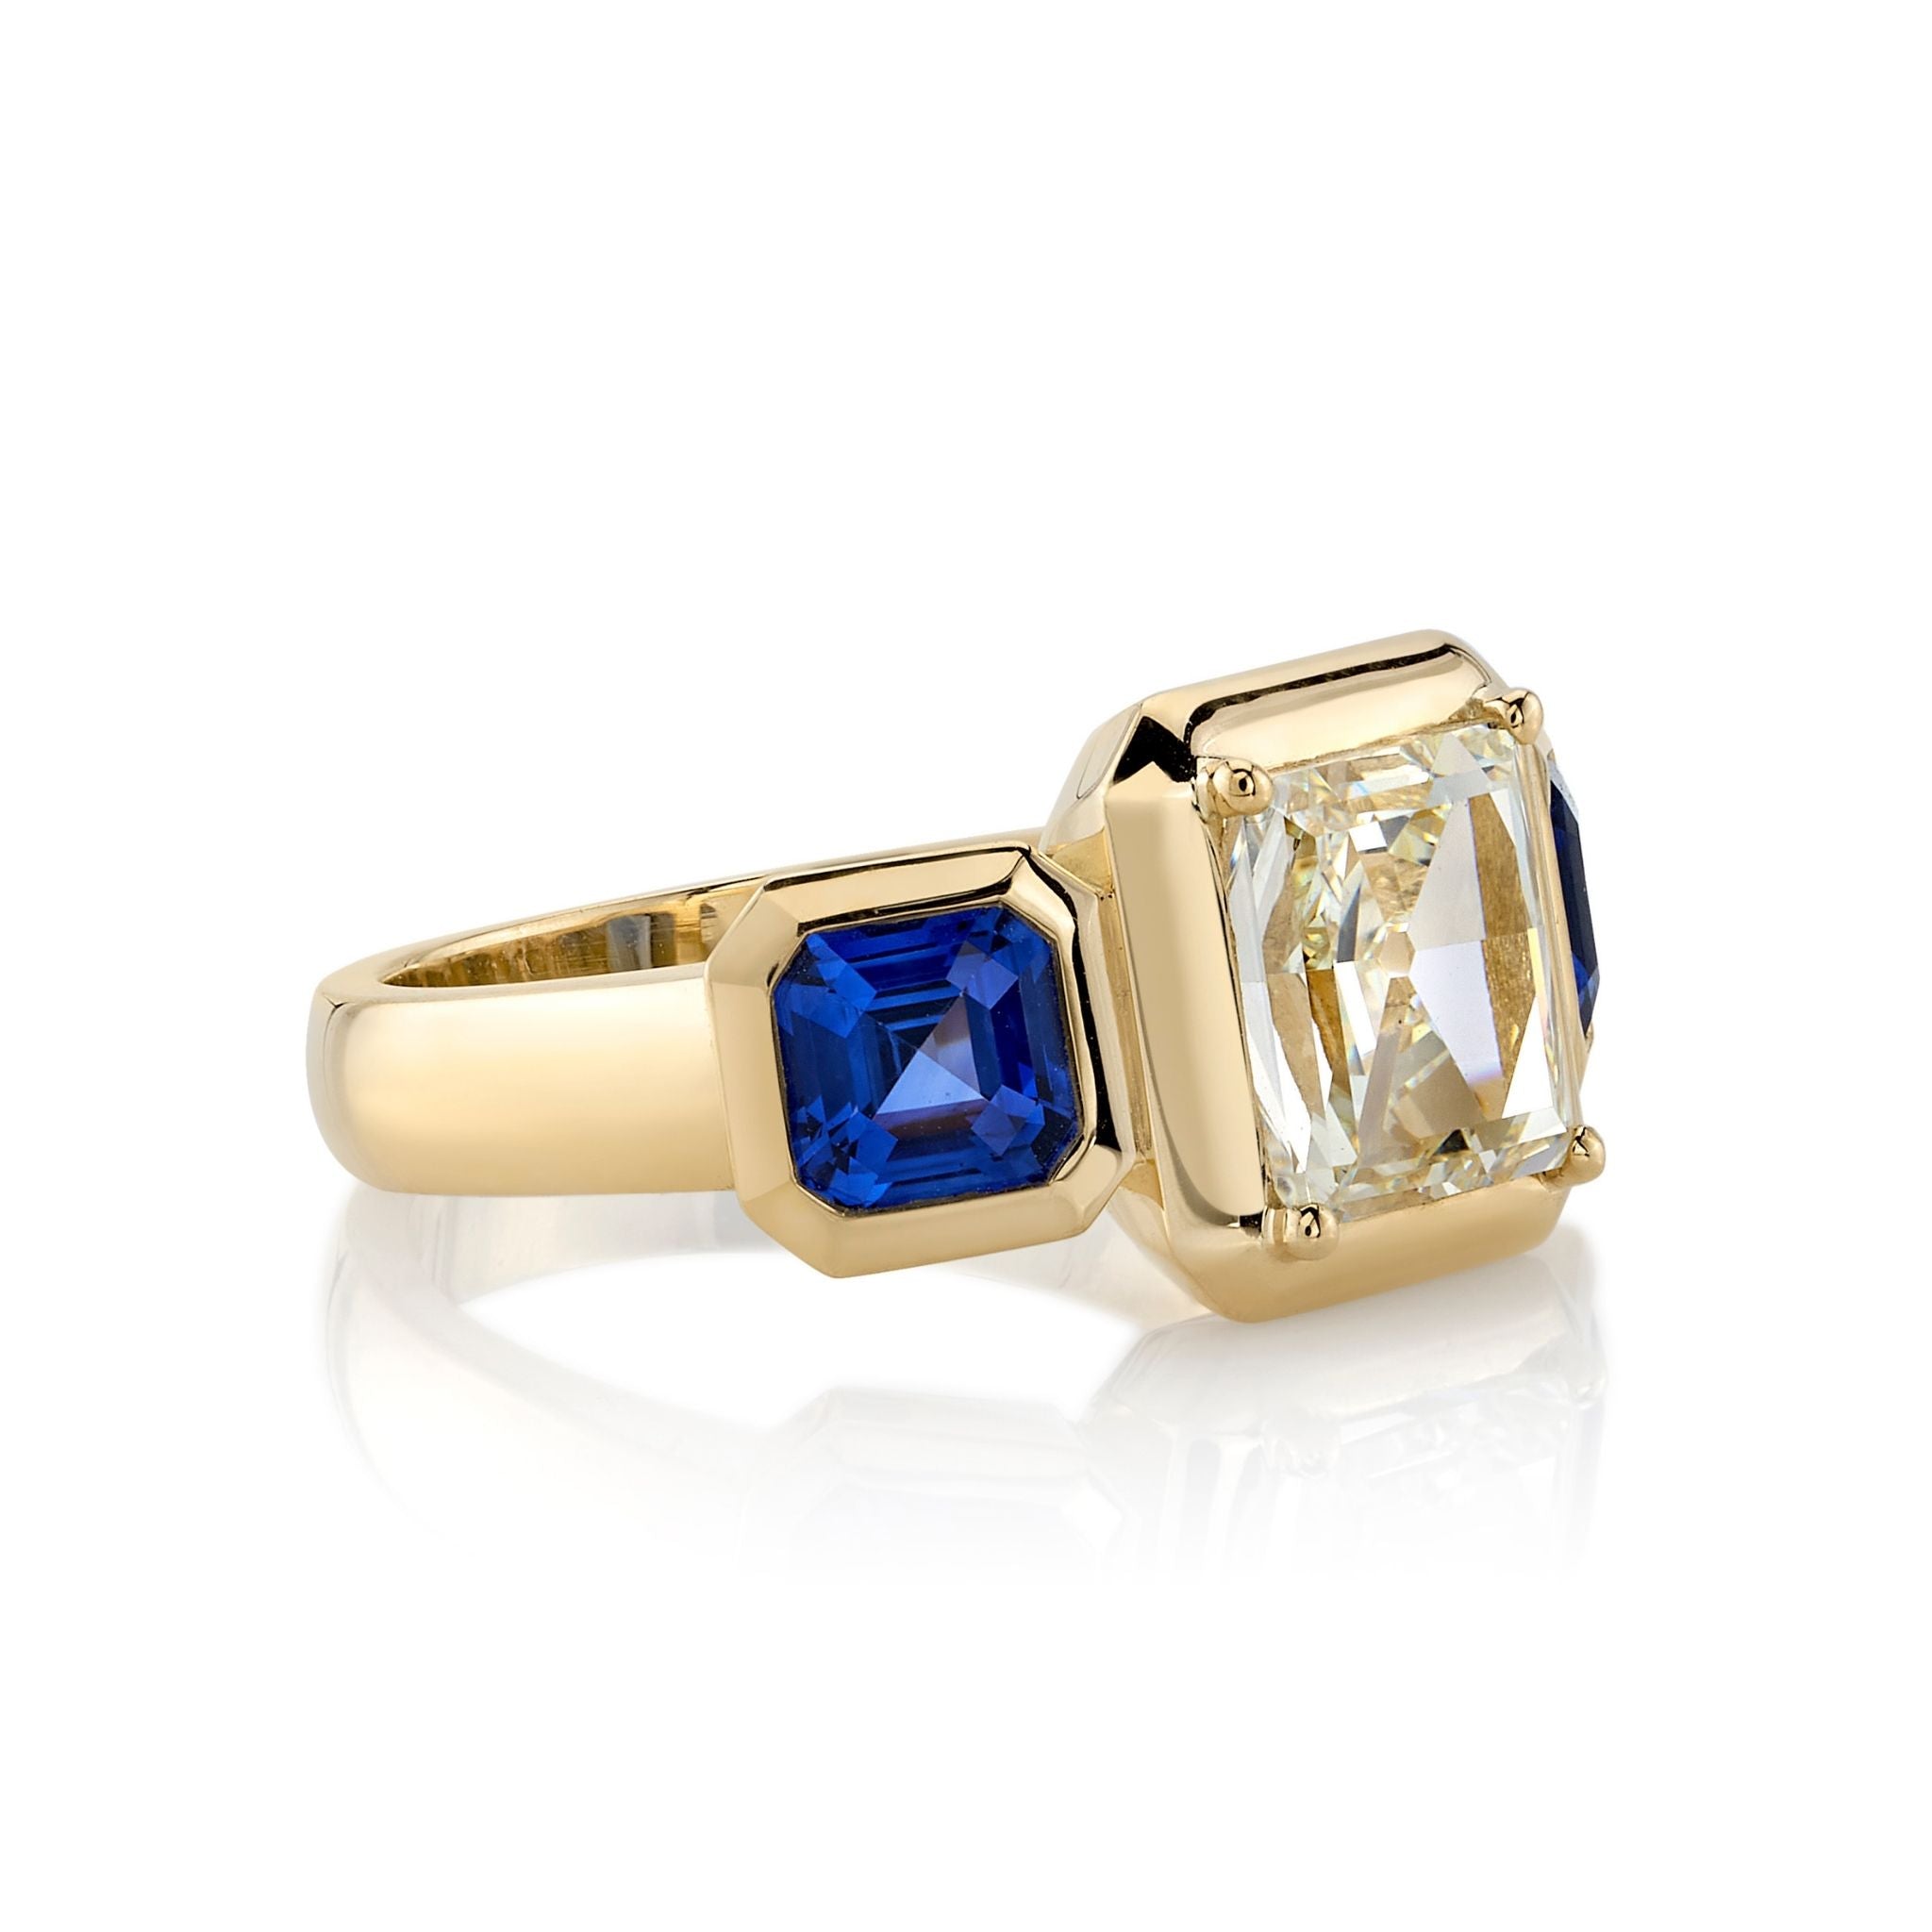 SINGLE STONE GLORIA RING featuring 1.77ct K/VS1 GIA certified rectangular mixed cut diamond with 1.65ctw blue sapphire accent stones set in a handcrafted 18K yellow gold mounting.